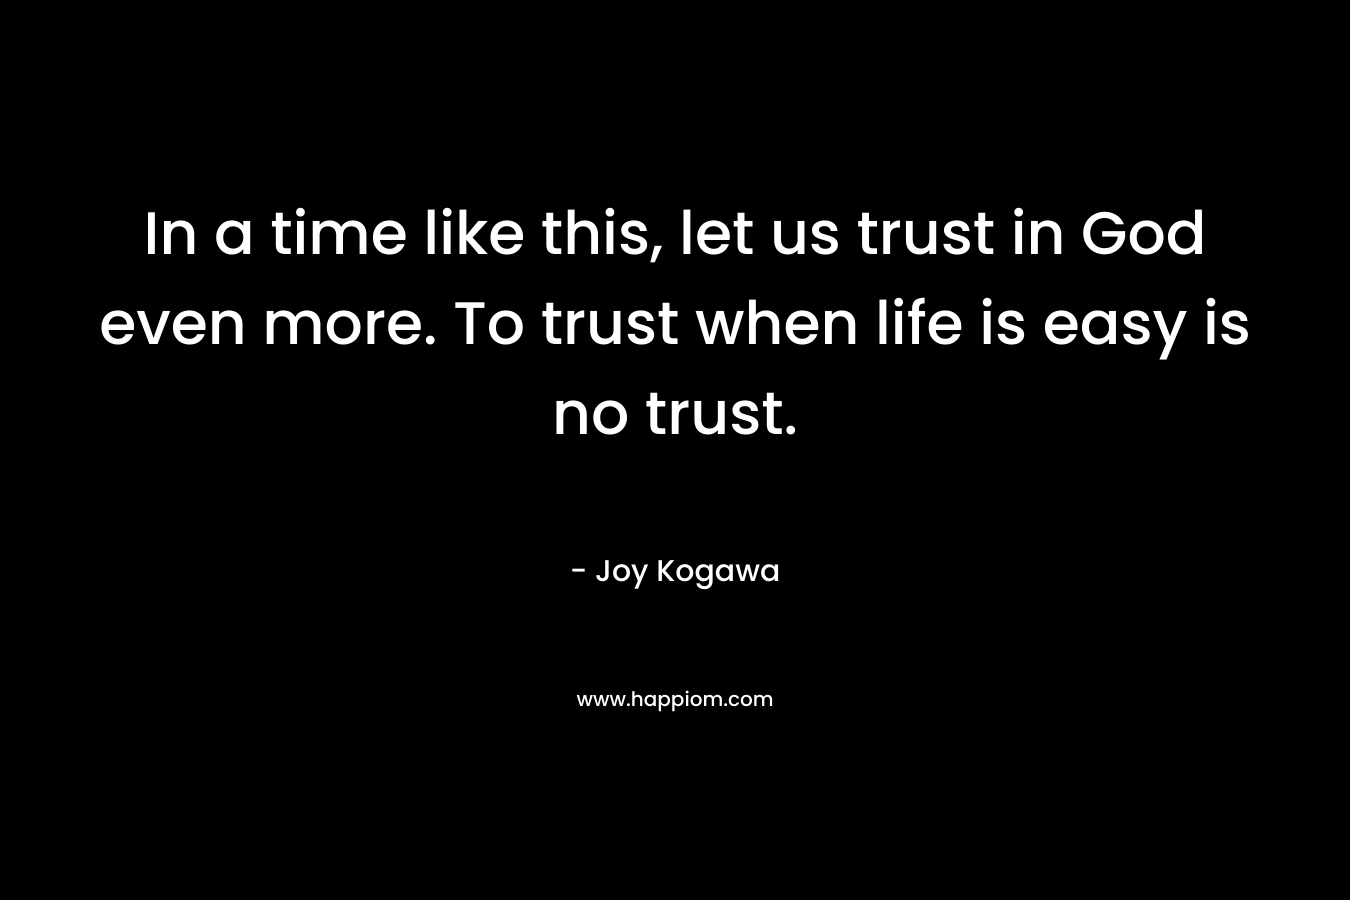 In a time like this, let us trust in God even more. To trust when life is easy is no trust. – Joy Kogawa